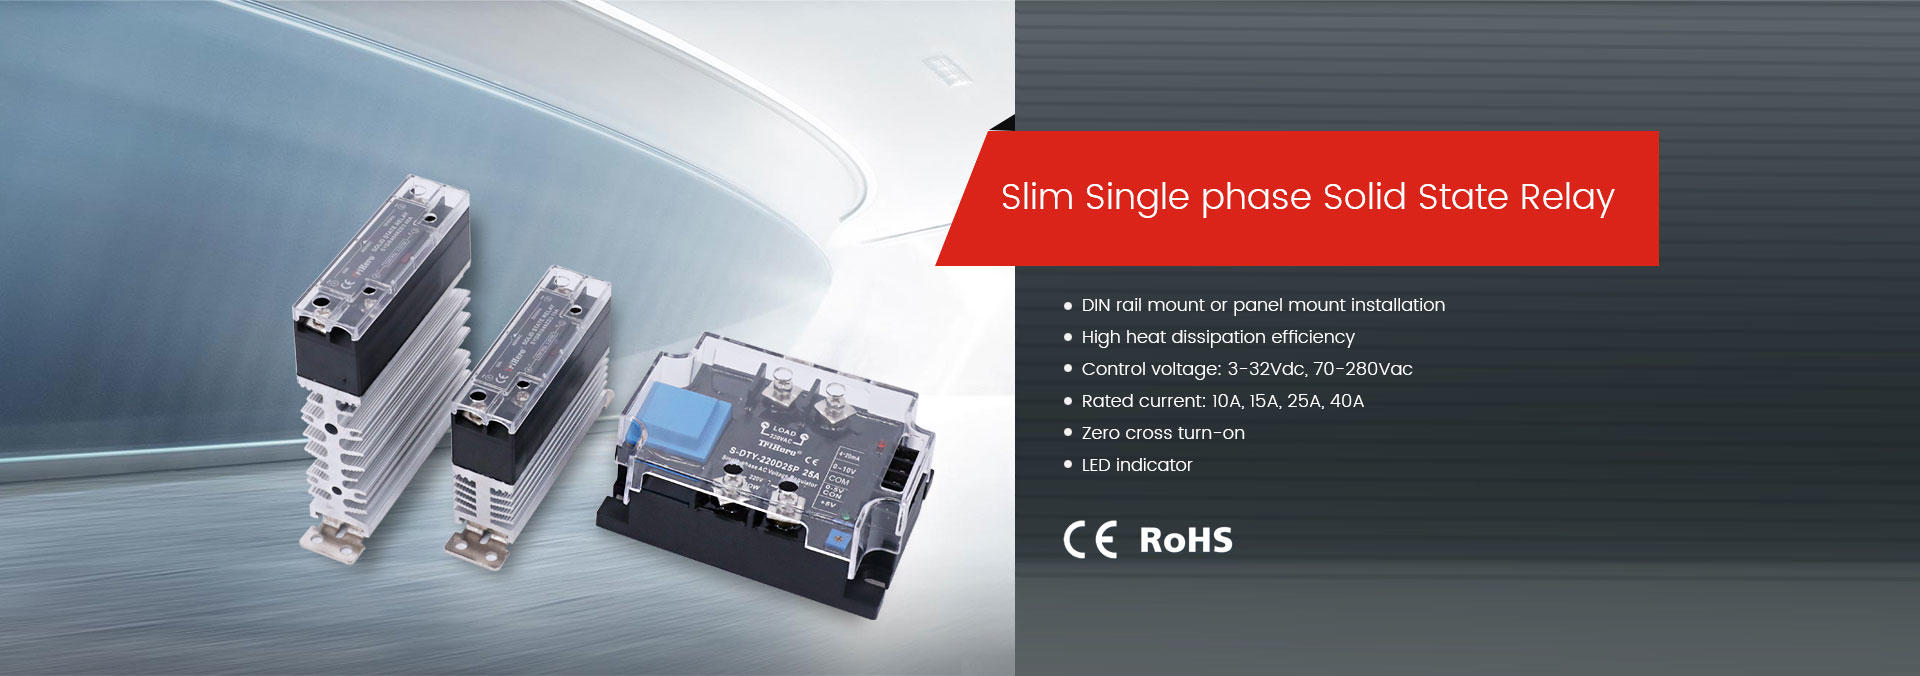 Slim Single phase Solid State Relay